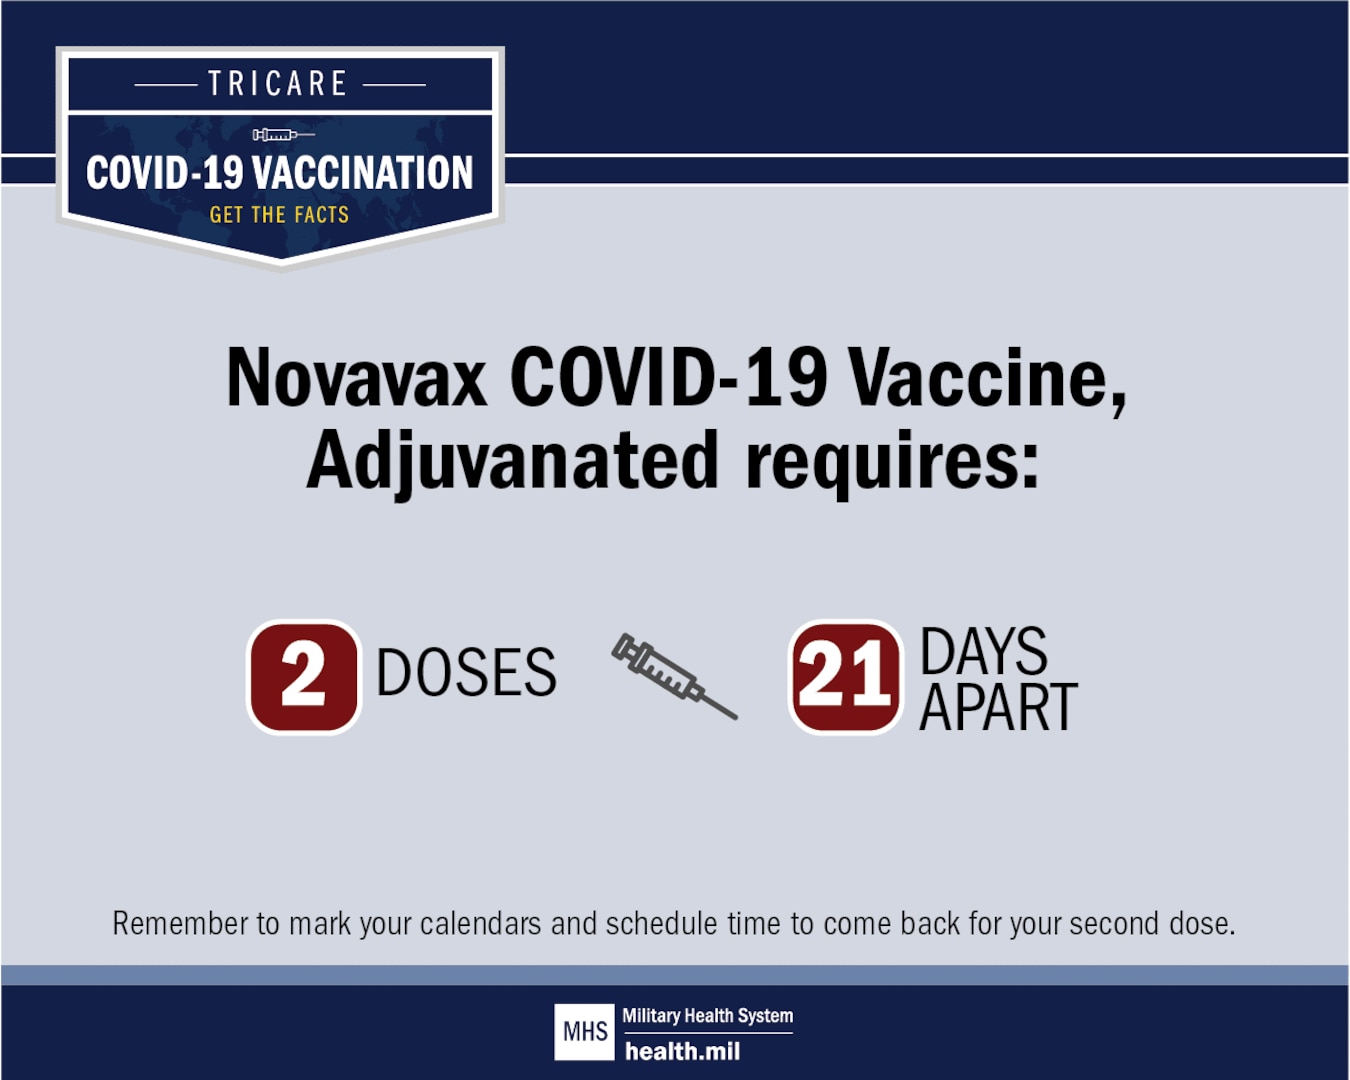 Graphic with the following text "Novavax COVID-19 Vaccine, Adjuvanated requires: 2 DOSES 21 DAYS APART."